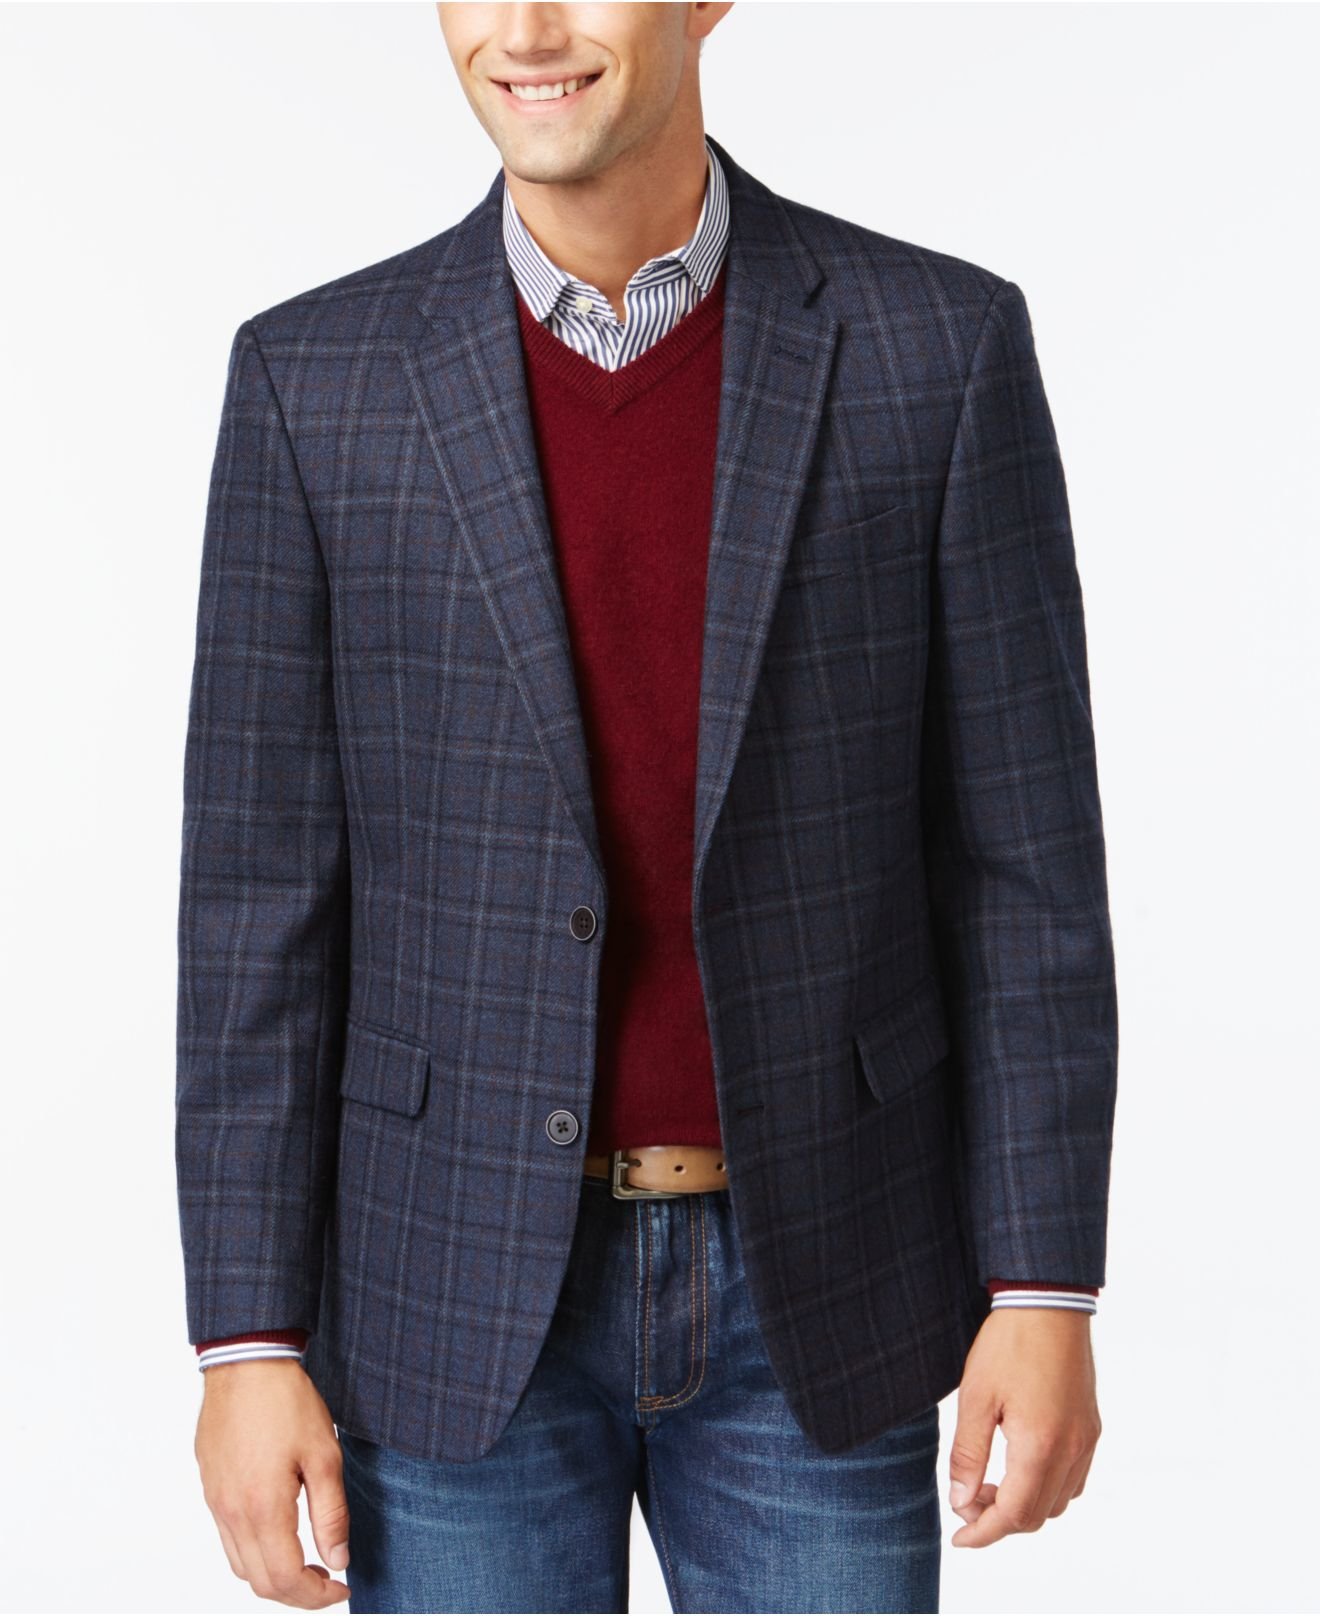 Lyst - Tommy Hilfiger Blue Plaid With Deco Classic-fit Sport Coat in ...